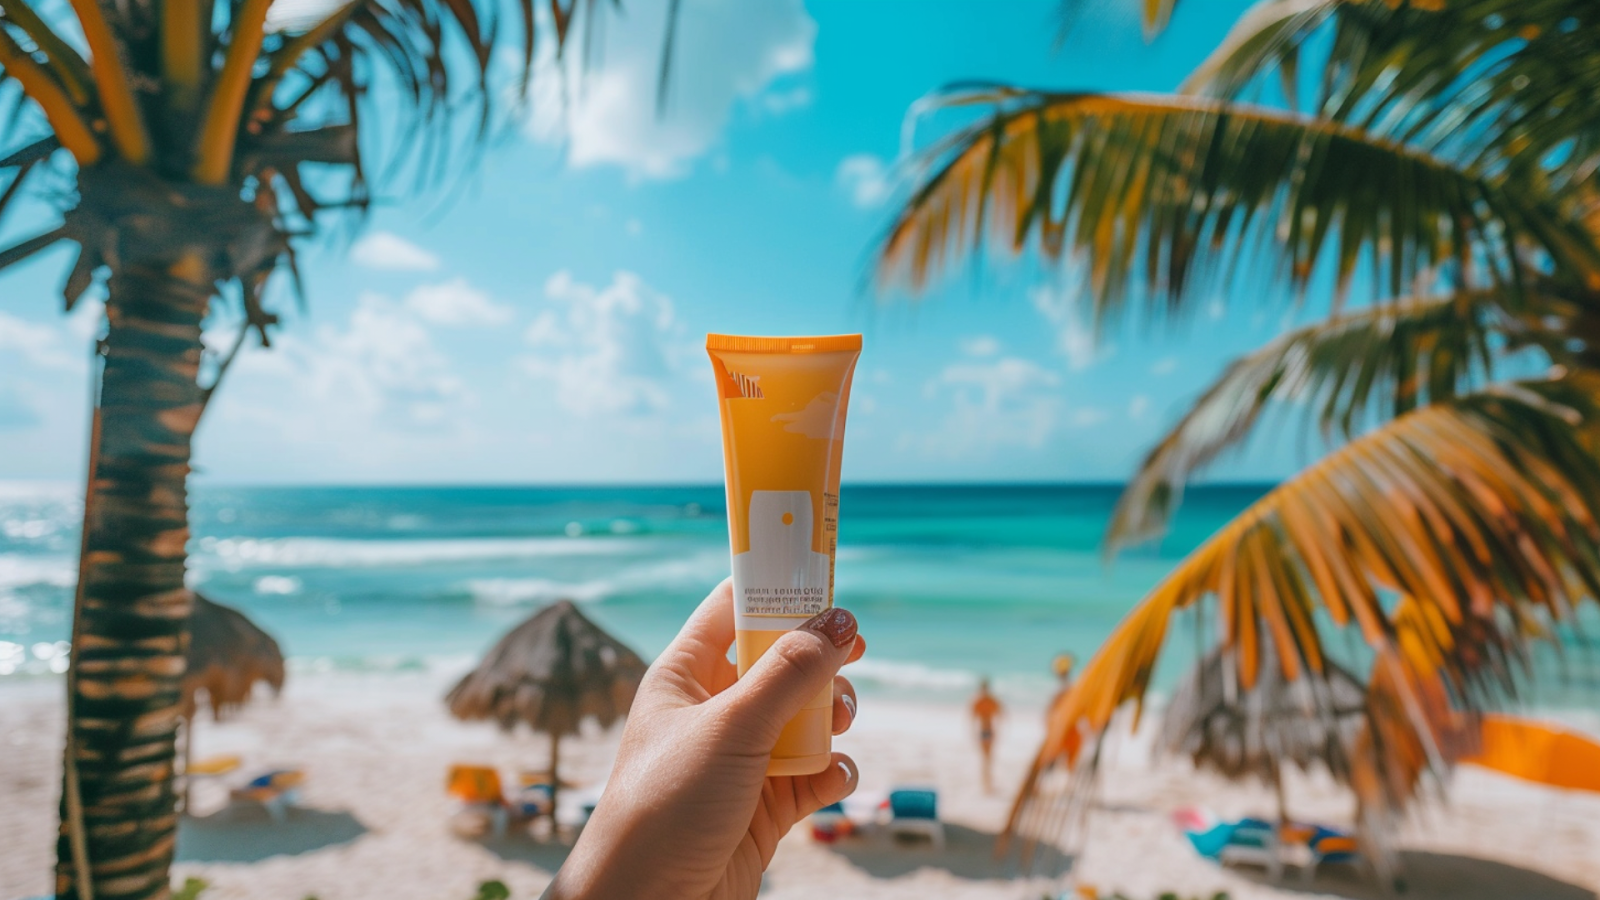 A hand holding a bottle of sunscreen on the beach.